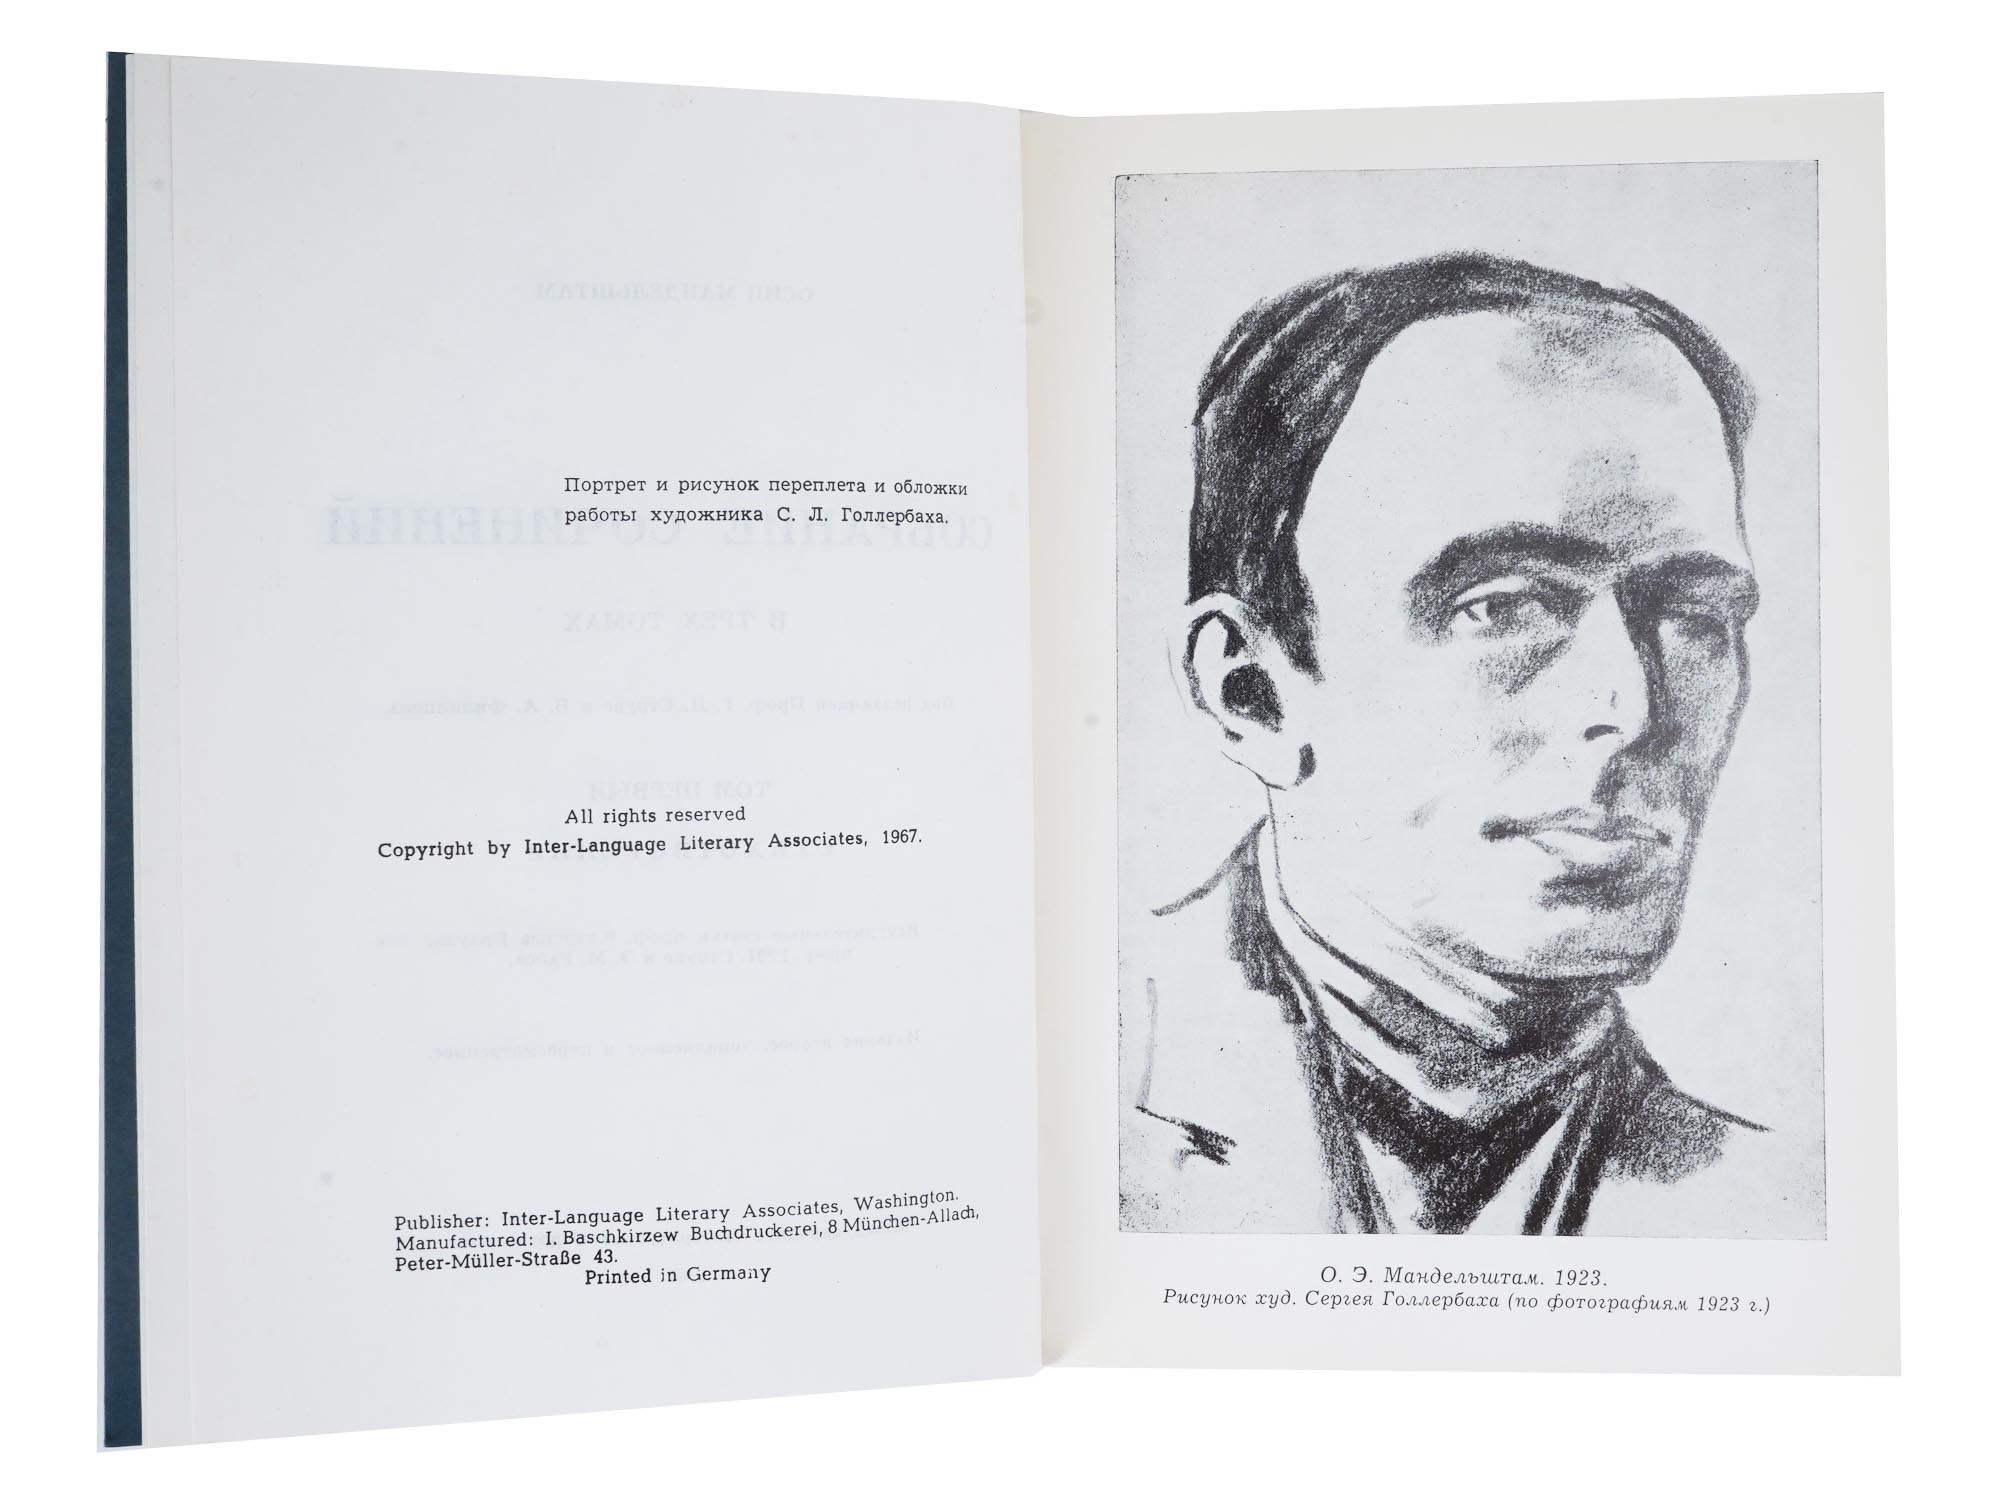 MANDELSTAM COLLECTED WORKS EDITED IN FOUR VOLUMES PIC-10